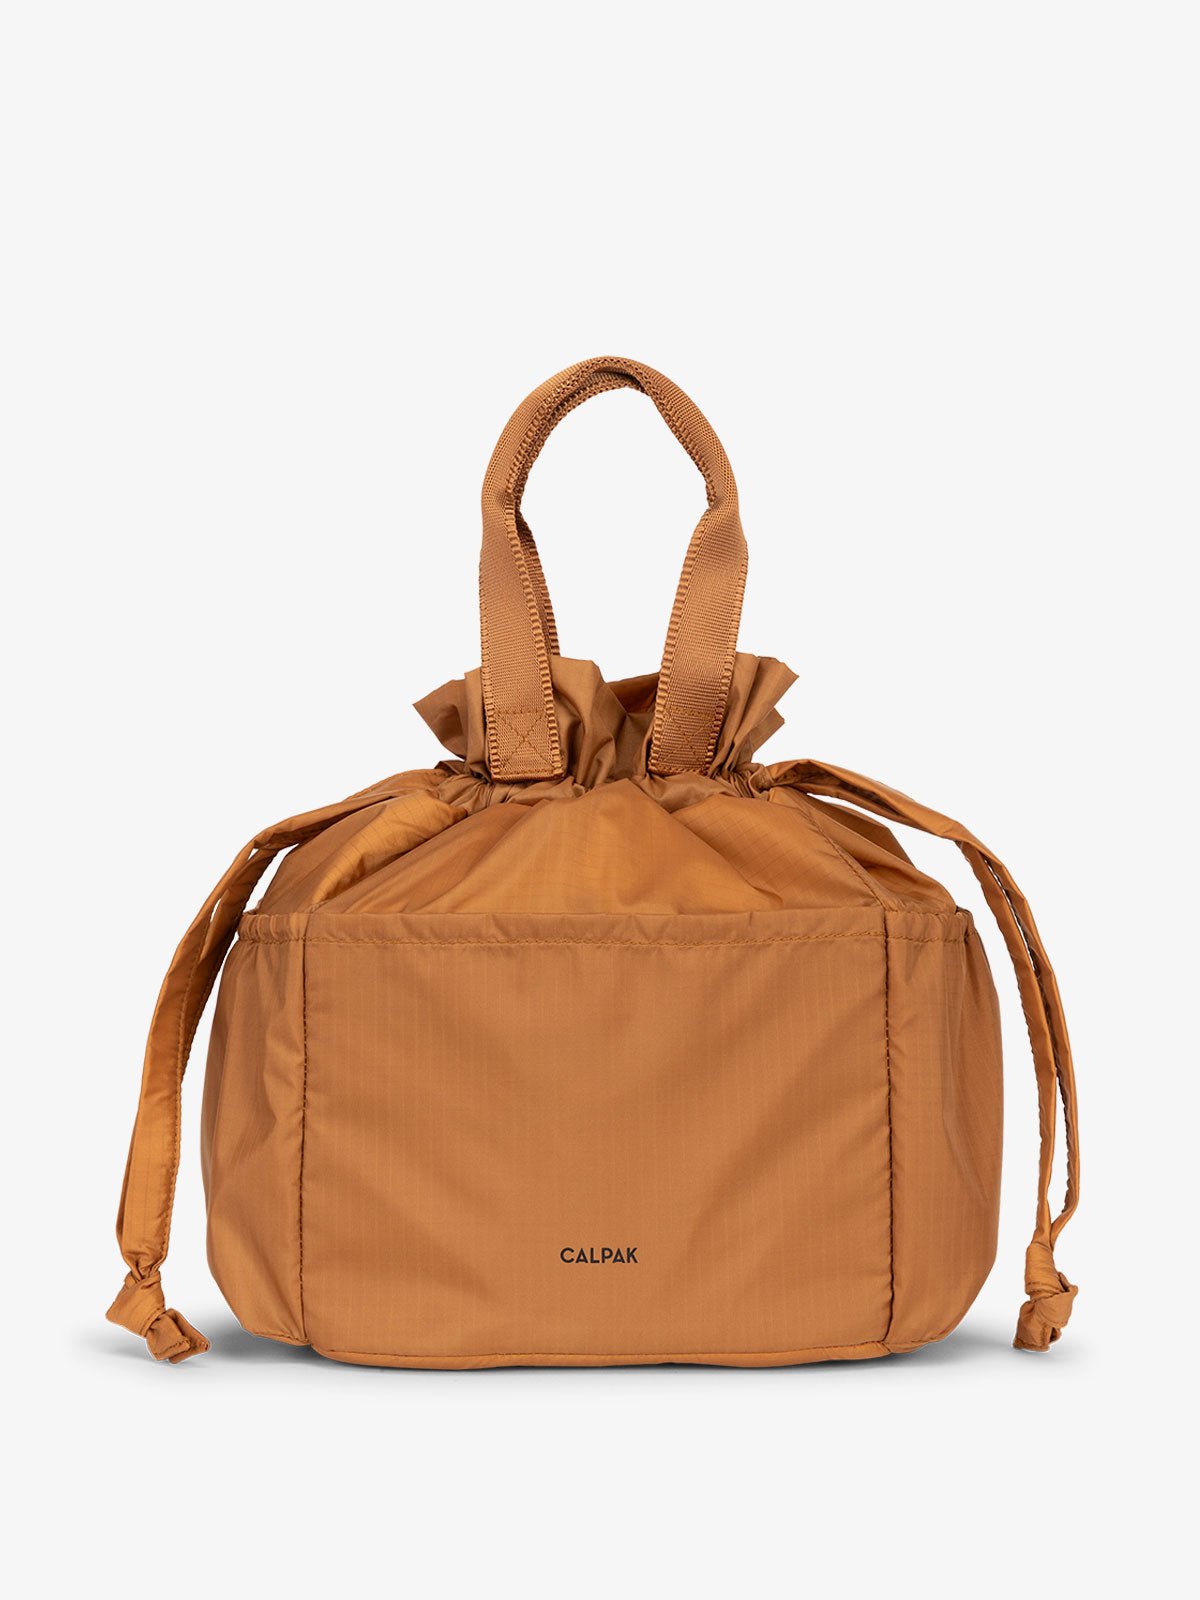 Lunch Bag in brown